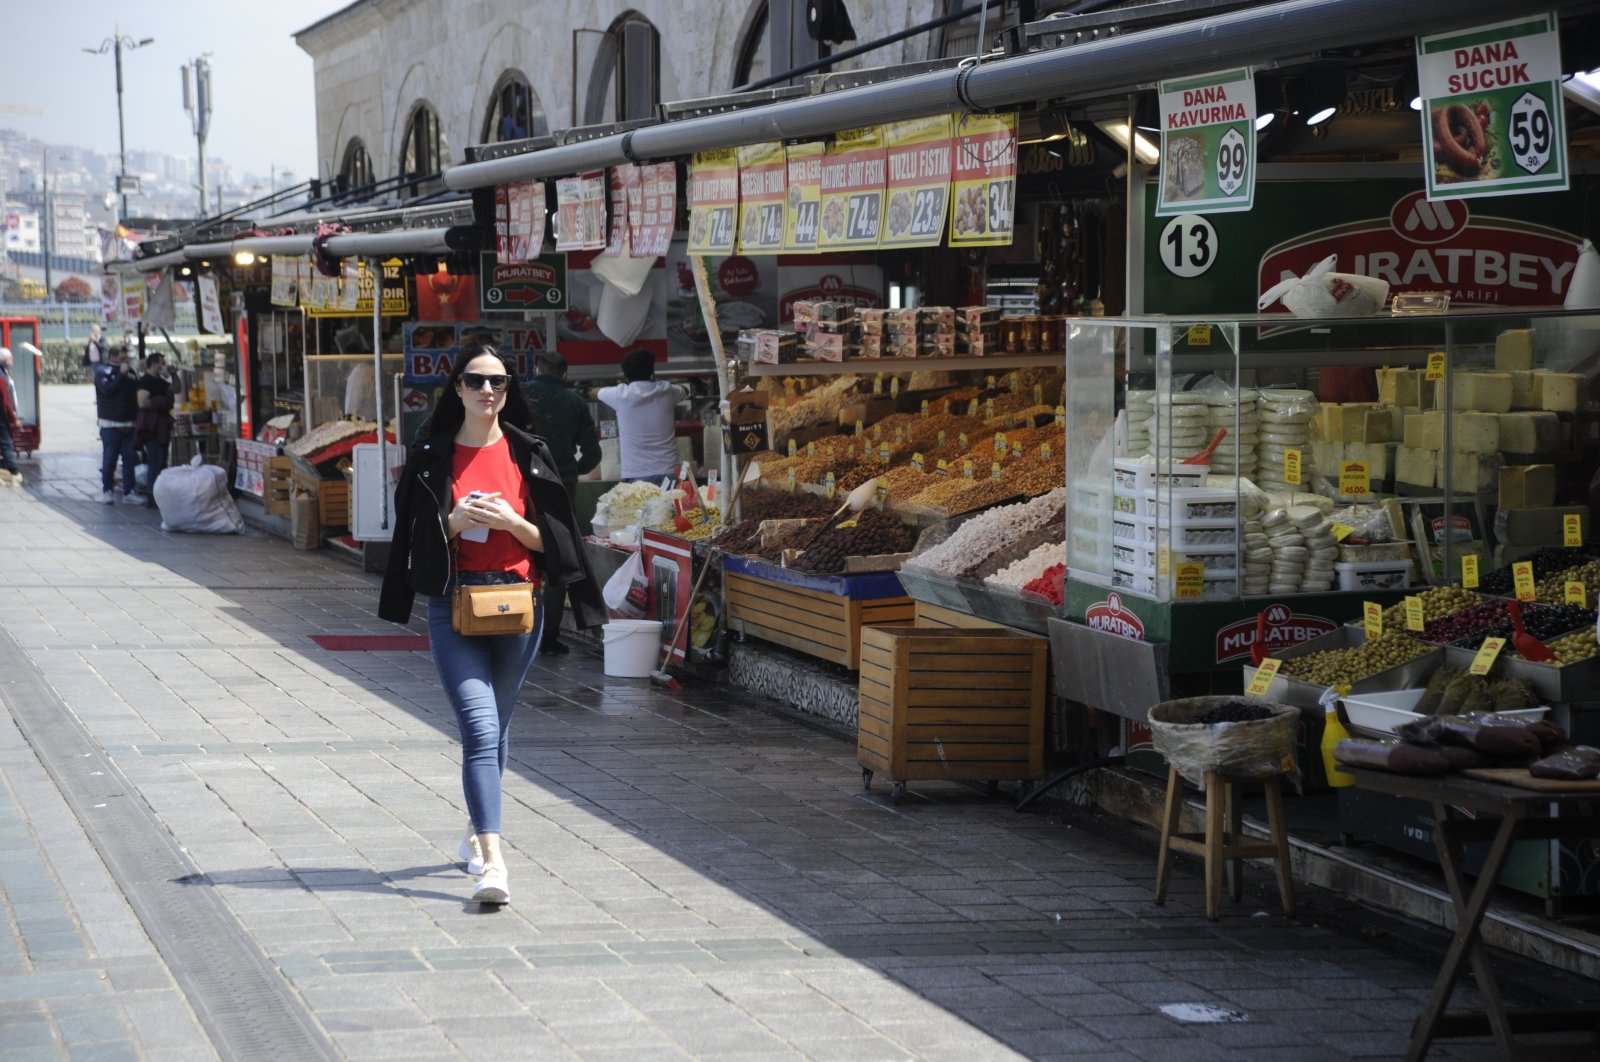 A woman passes by stores in the historic Eminönü neighborhood on the city's European side, Istanbul, Turkey, April 30, 2021. (IHA Photo)